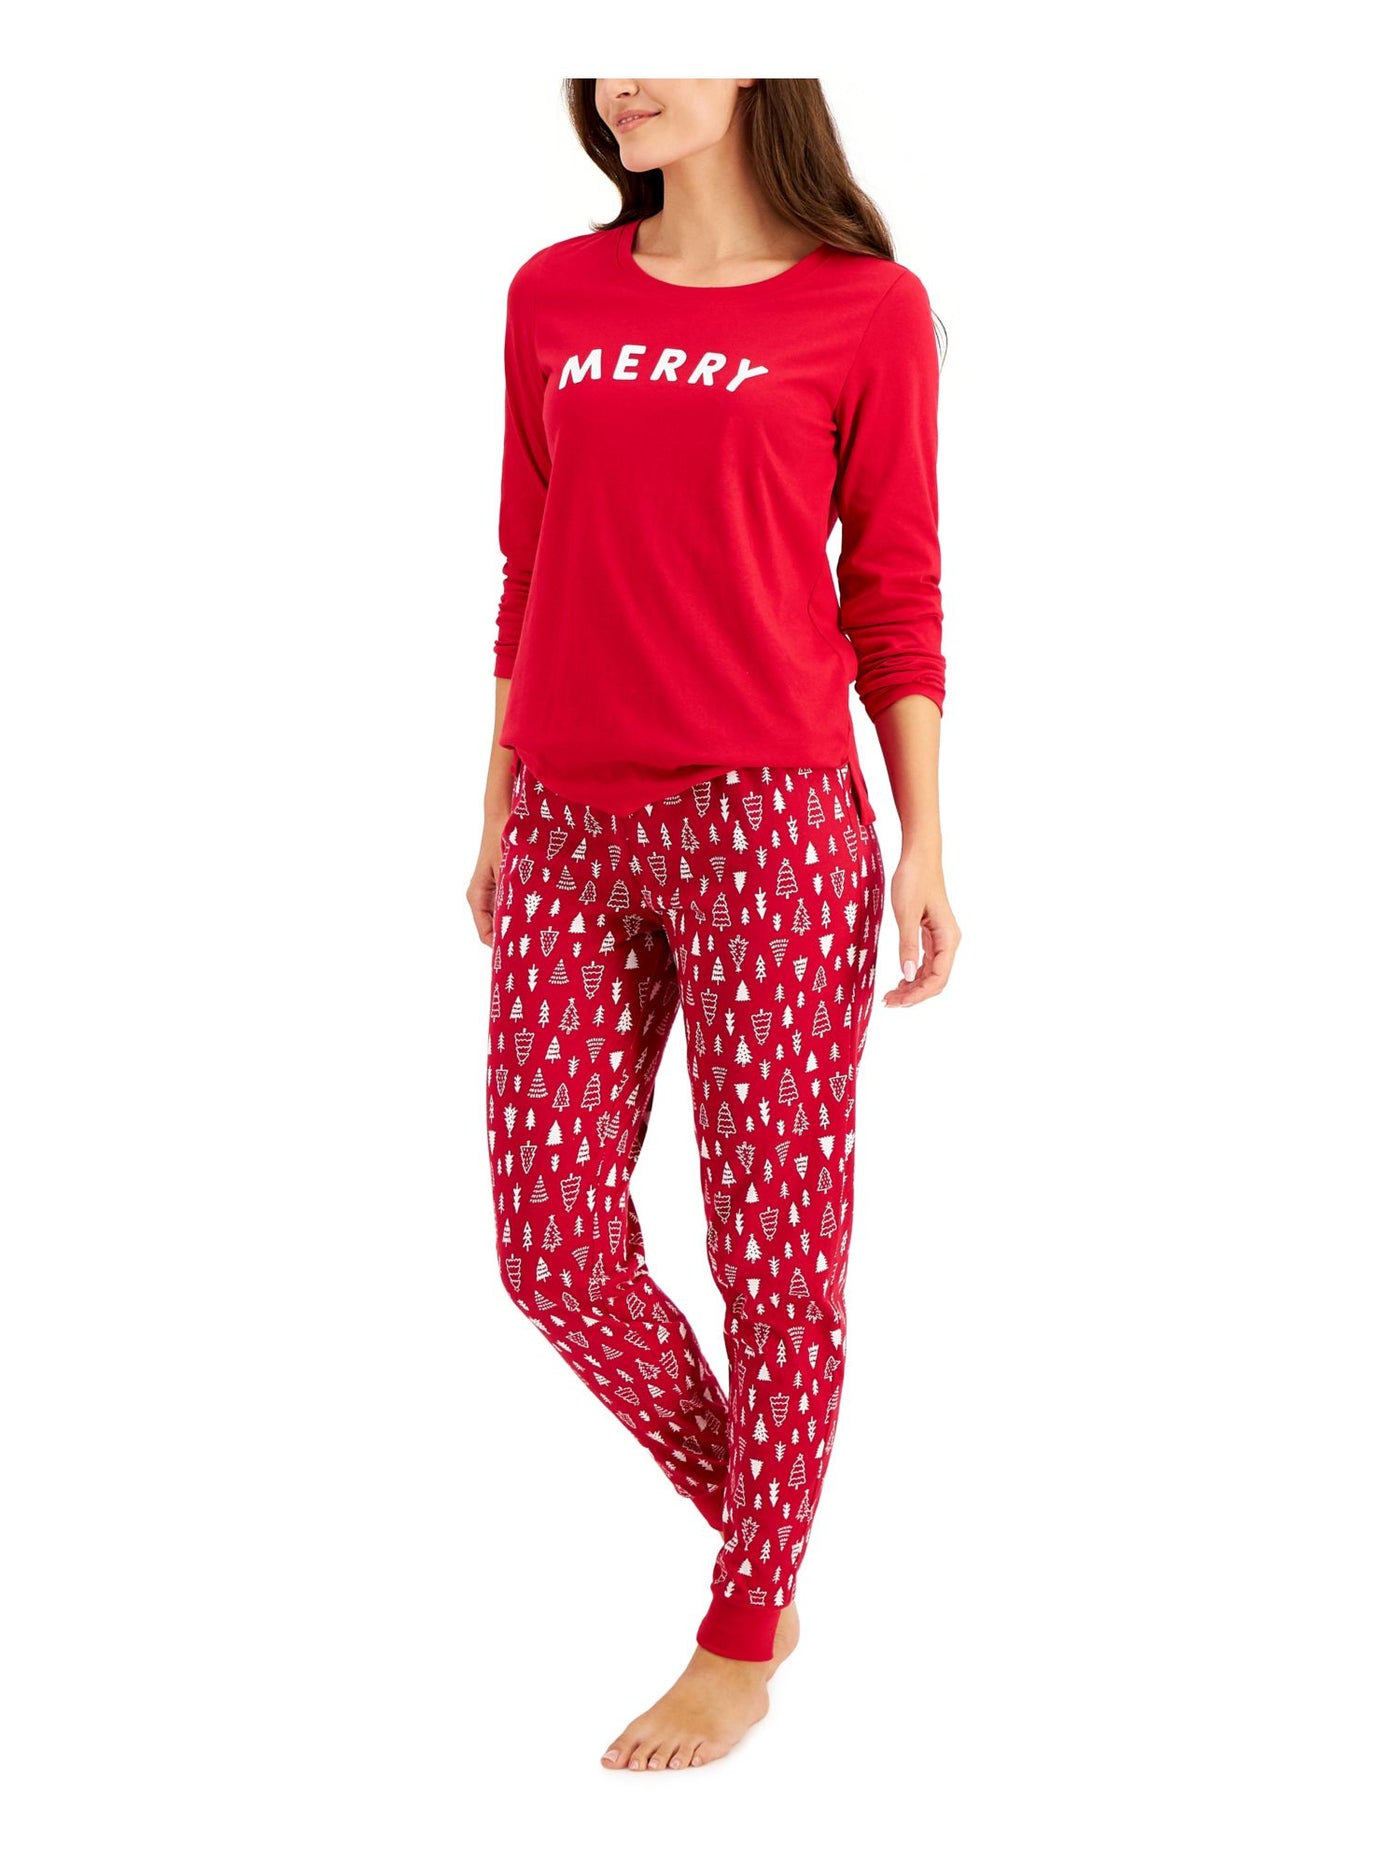 FAMILY PJs Womens Red Graphic Elastic Band Long Sleeve T-Shirt Top Cuffed Pants Pajamas L